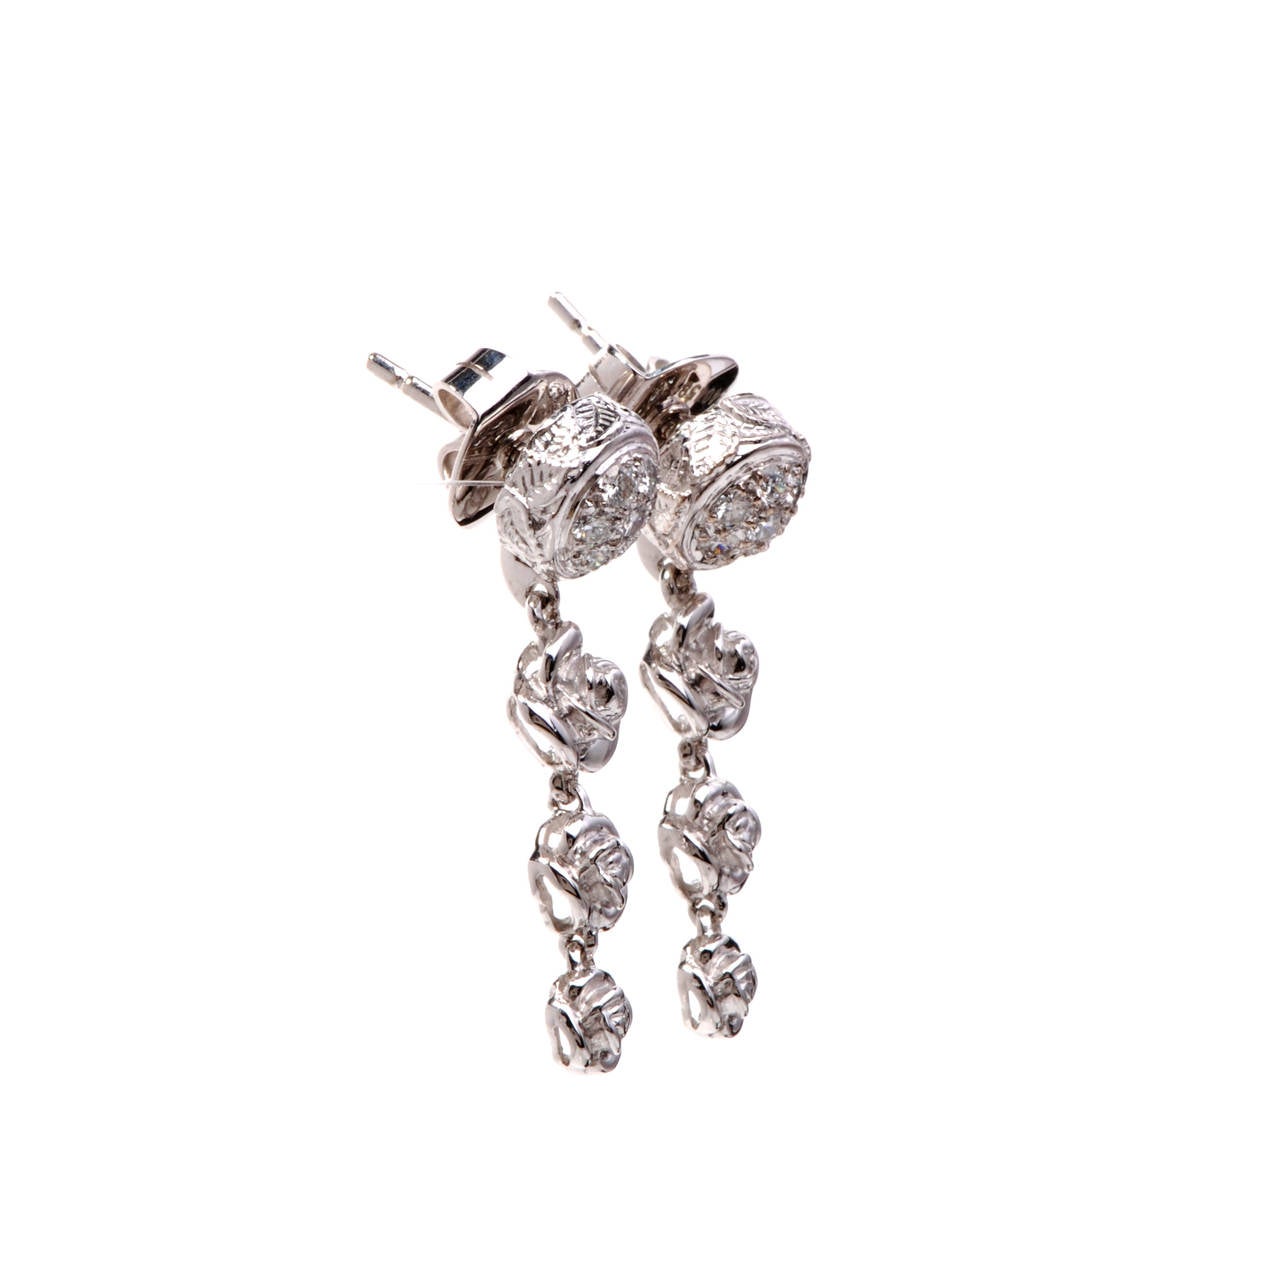 These romantic and very feminine, 100% Original Carrera Carrera drop earrings are crafted in solid 18K white gold. These earrings are accented with some 14 genuine pave set diamonds approx 0.30cttw, G color, VVS clarity. With stylish and very